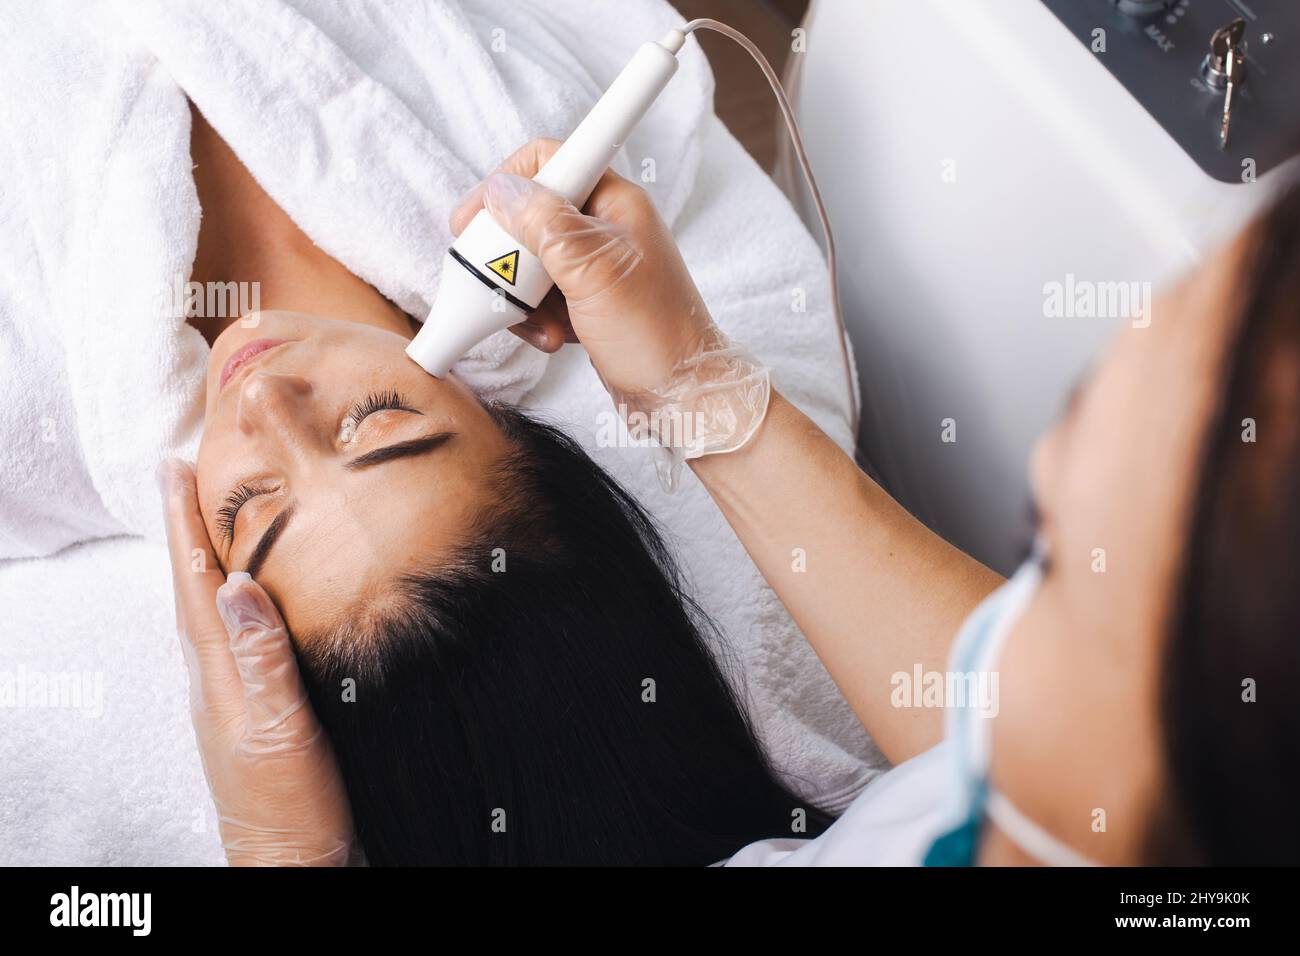 Beautician Making A Rejuvenating Facial Massage For The Woman In A Beauty Salon Lpg Apparatus